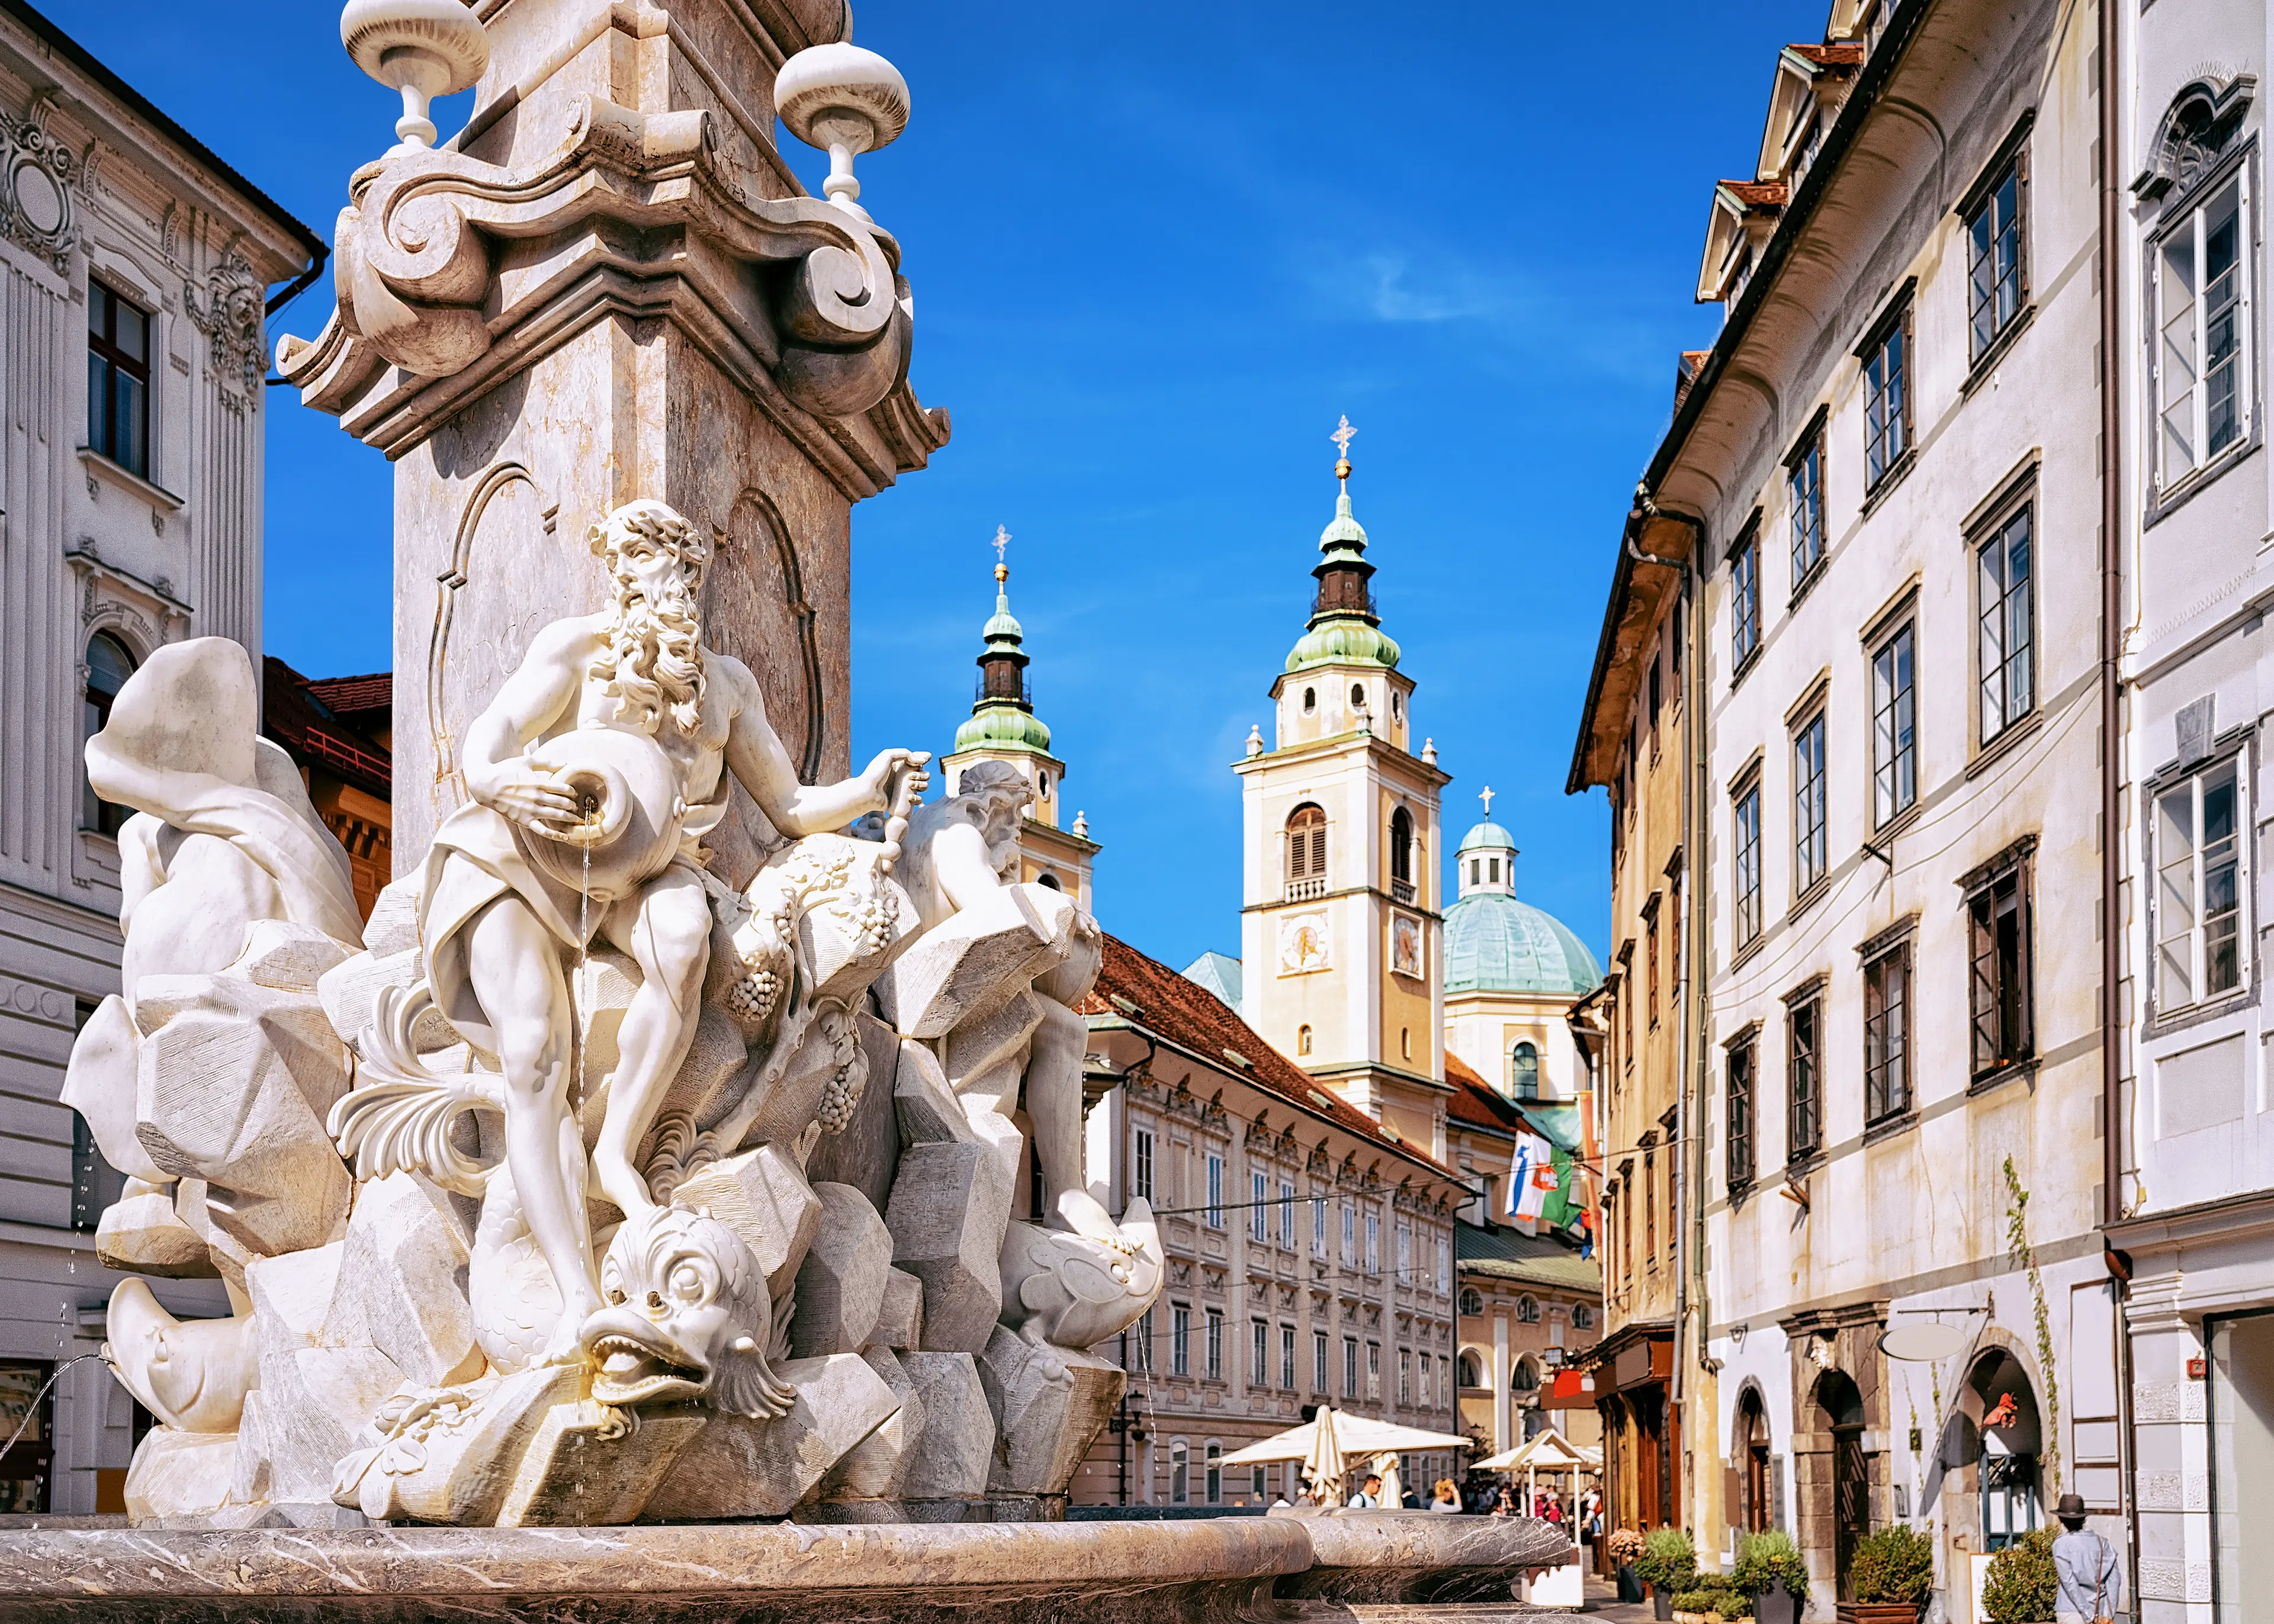 3-Day Solo Food, Wine, and Sightseeing Adventure in Ljubljana